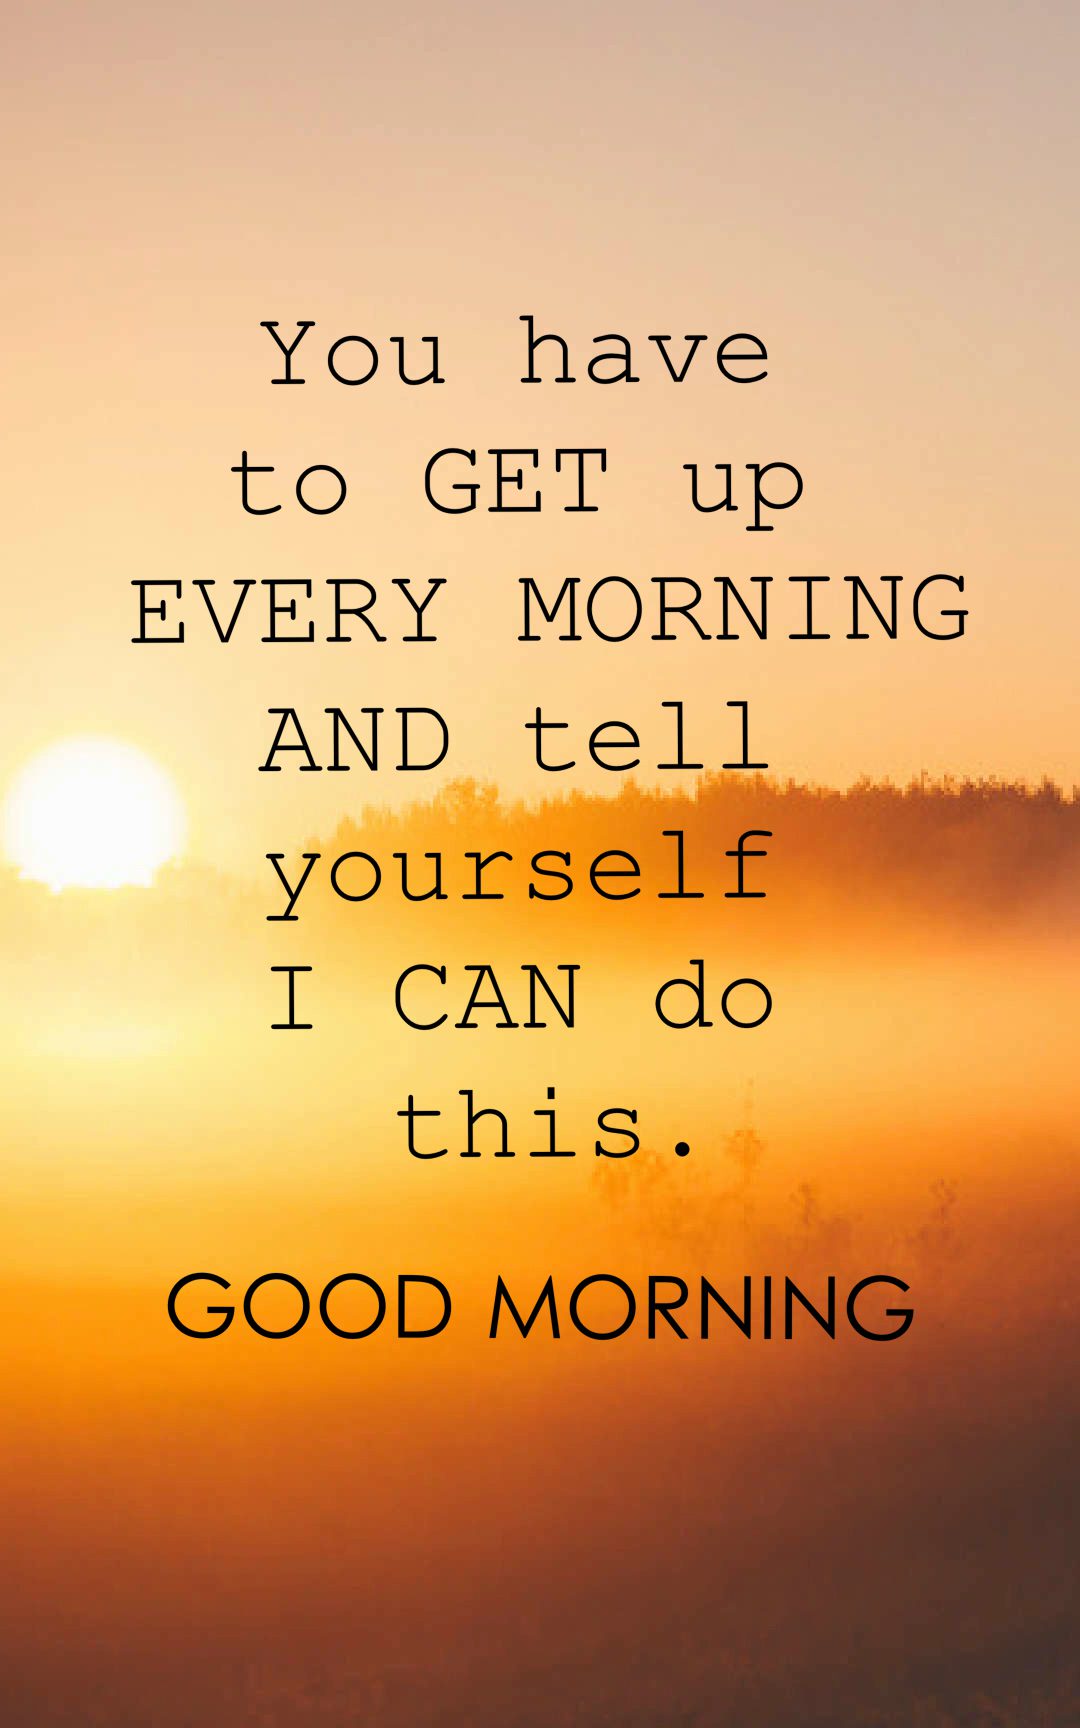 You have to get up every morning and tell yourself I can do this.